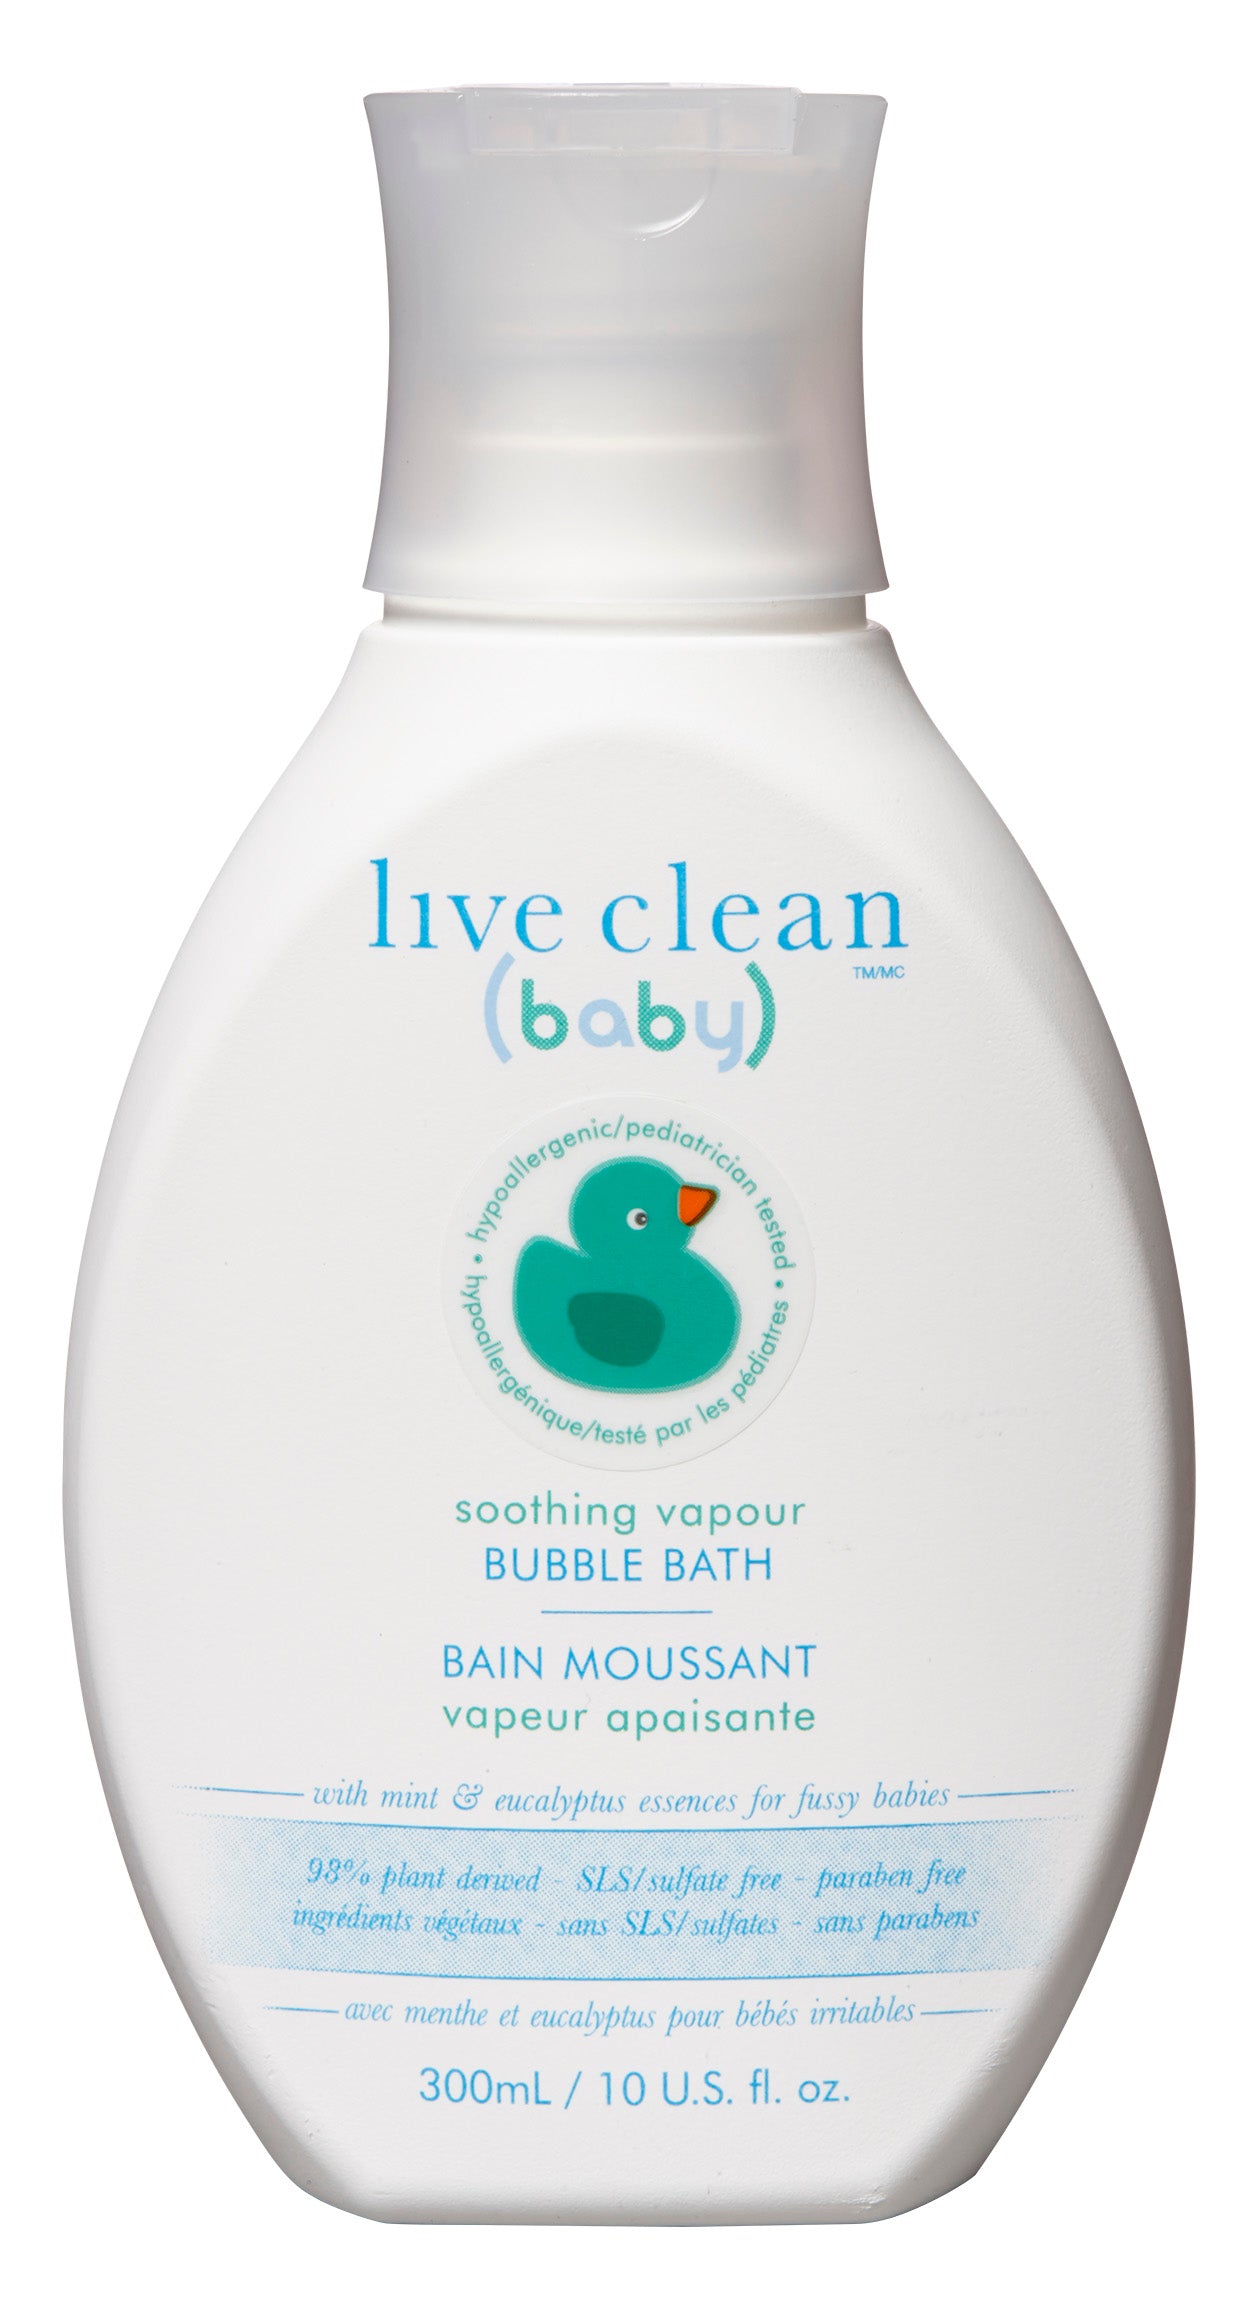 Bubble Bath, baby, soothing vapour, Live Clean 300ml